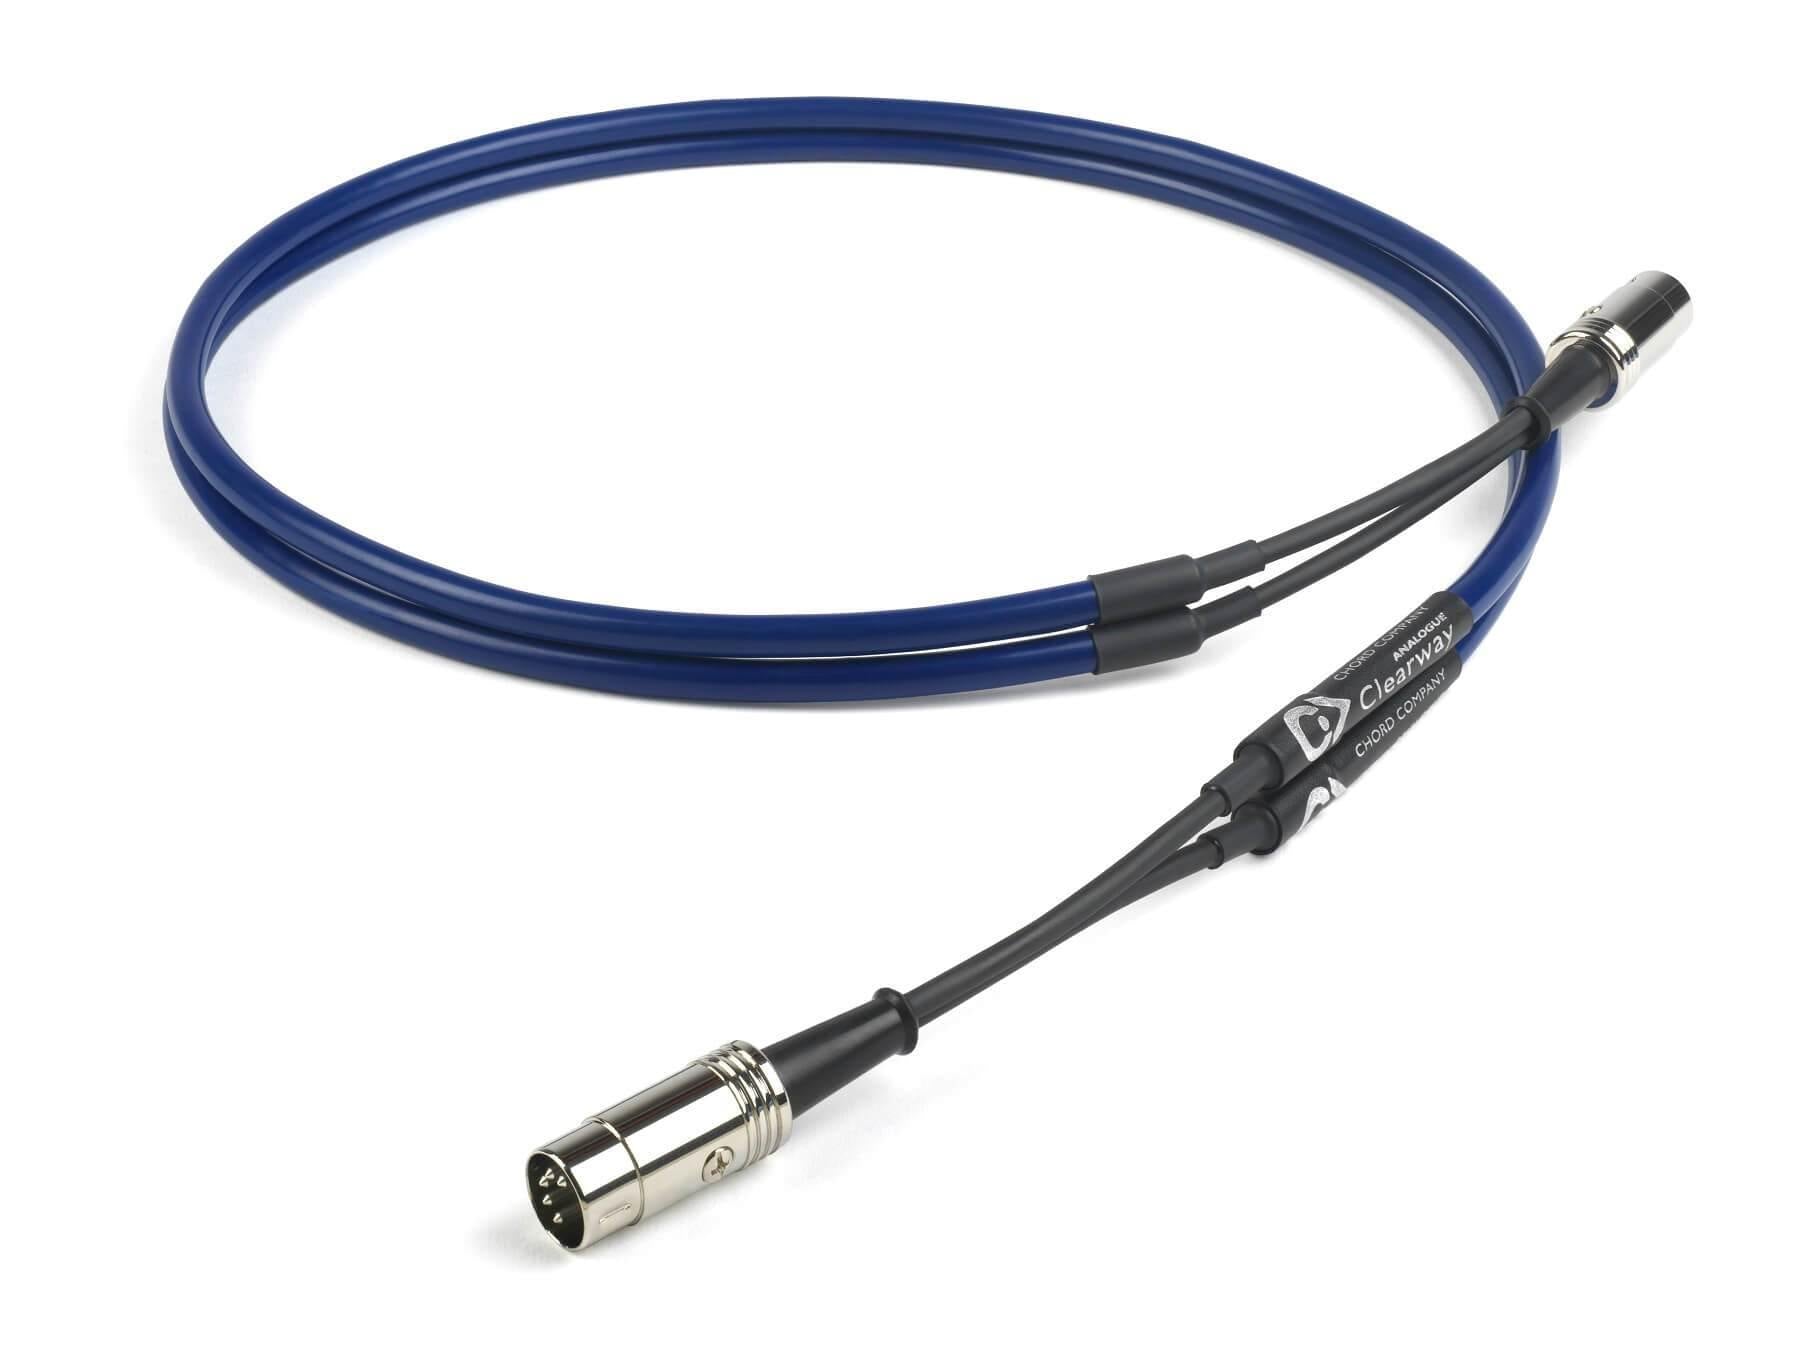 Chord Clearway Analogue DIN Cable